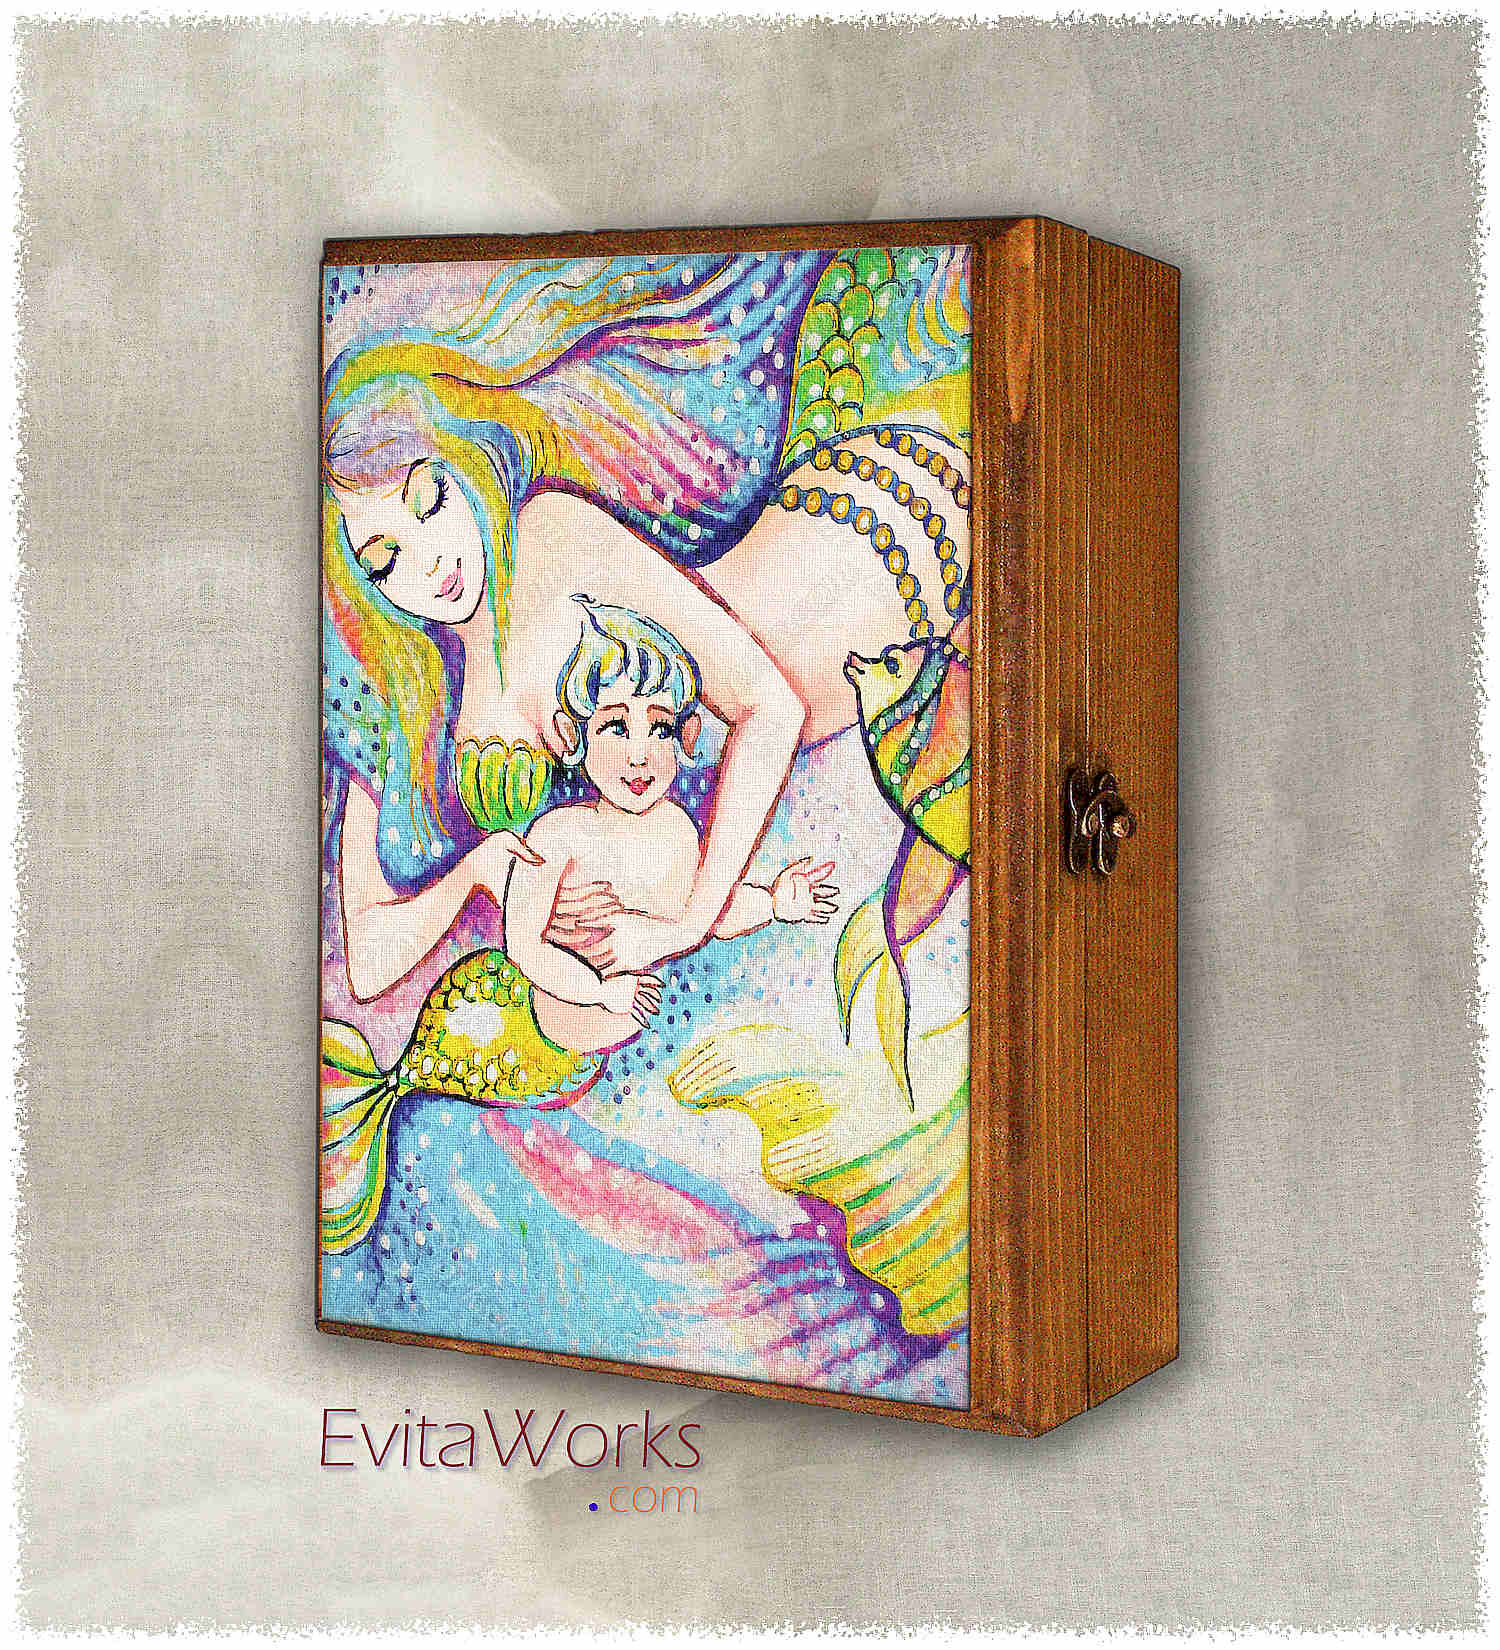 Hit to learn about "Little Fish, mermaid mother and child" on jewelboxes